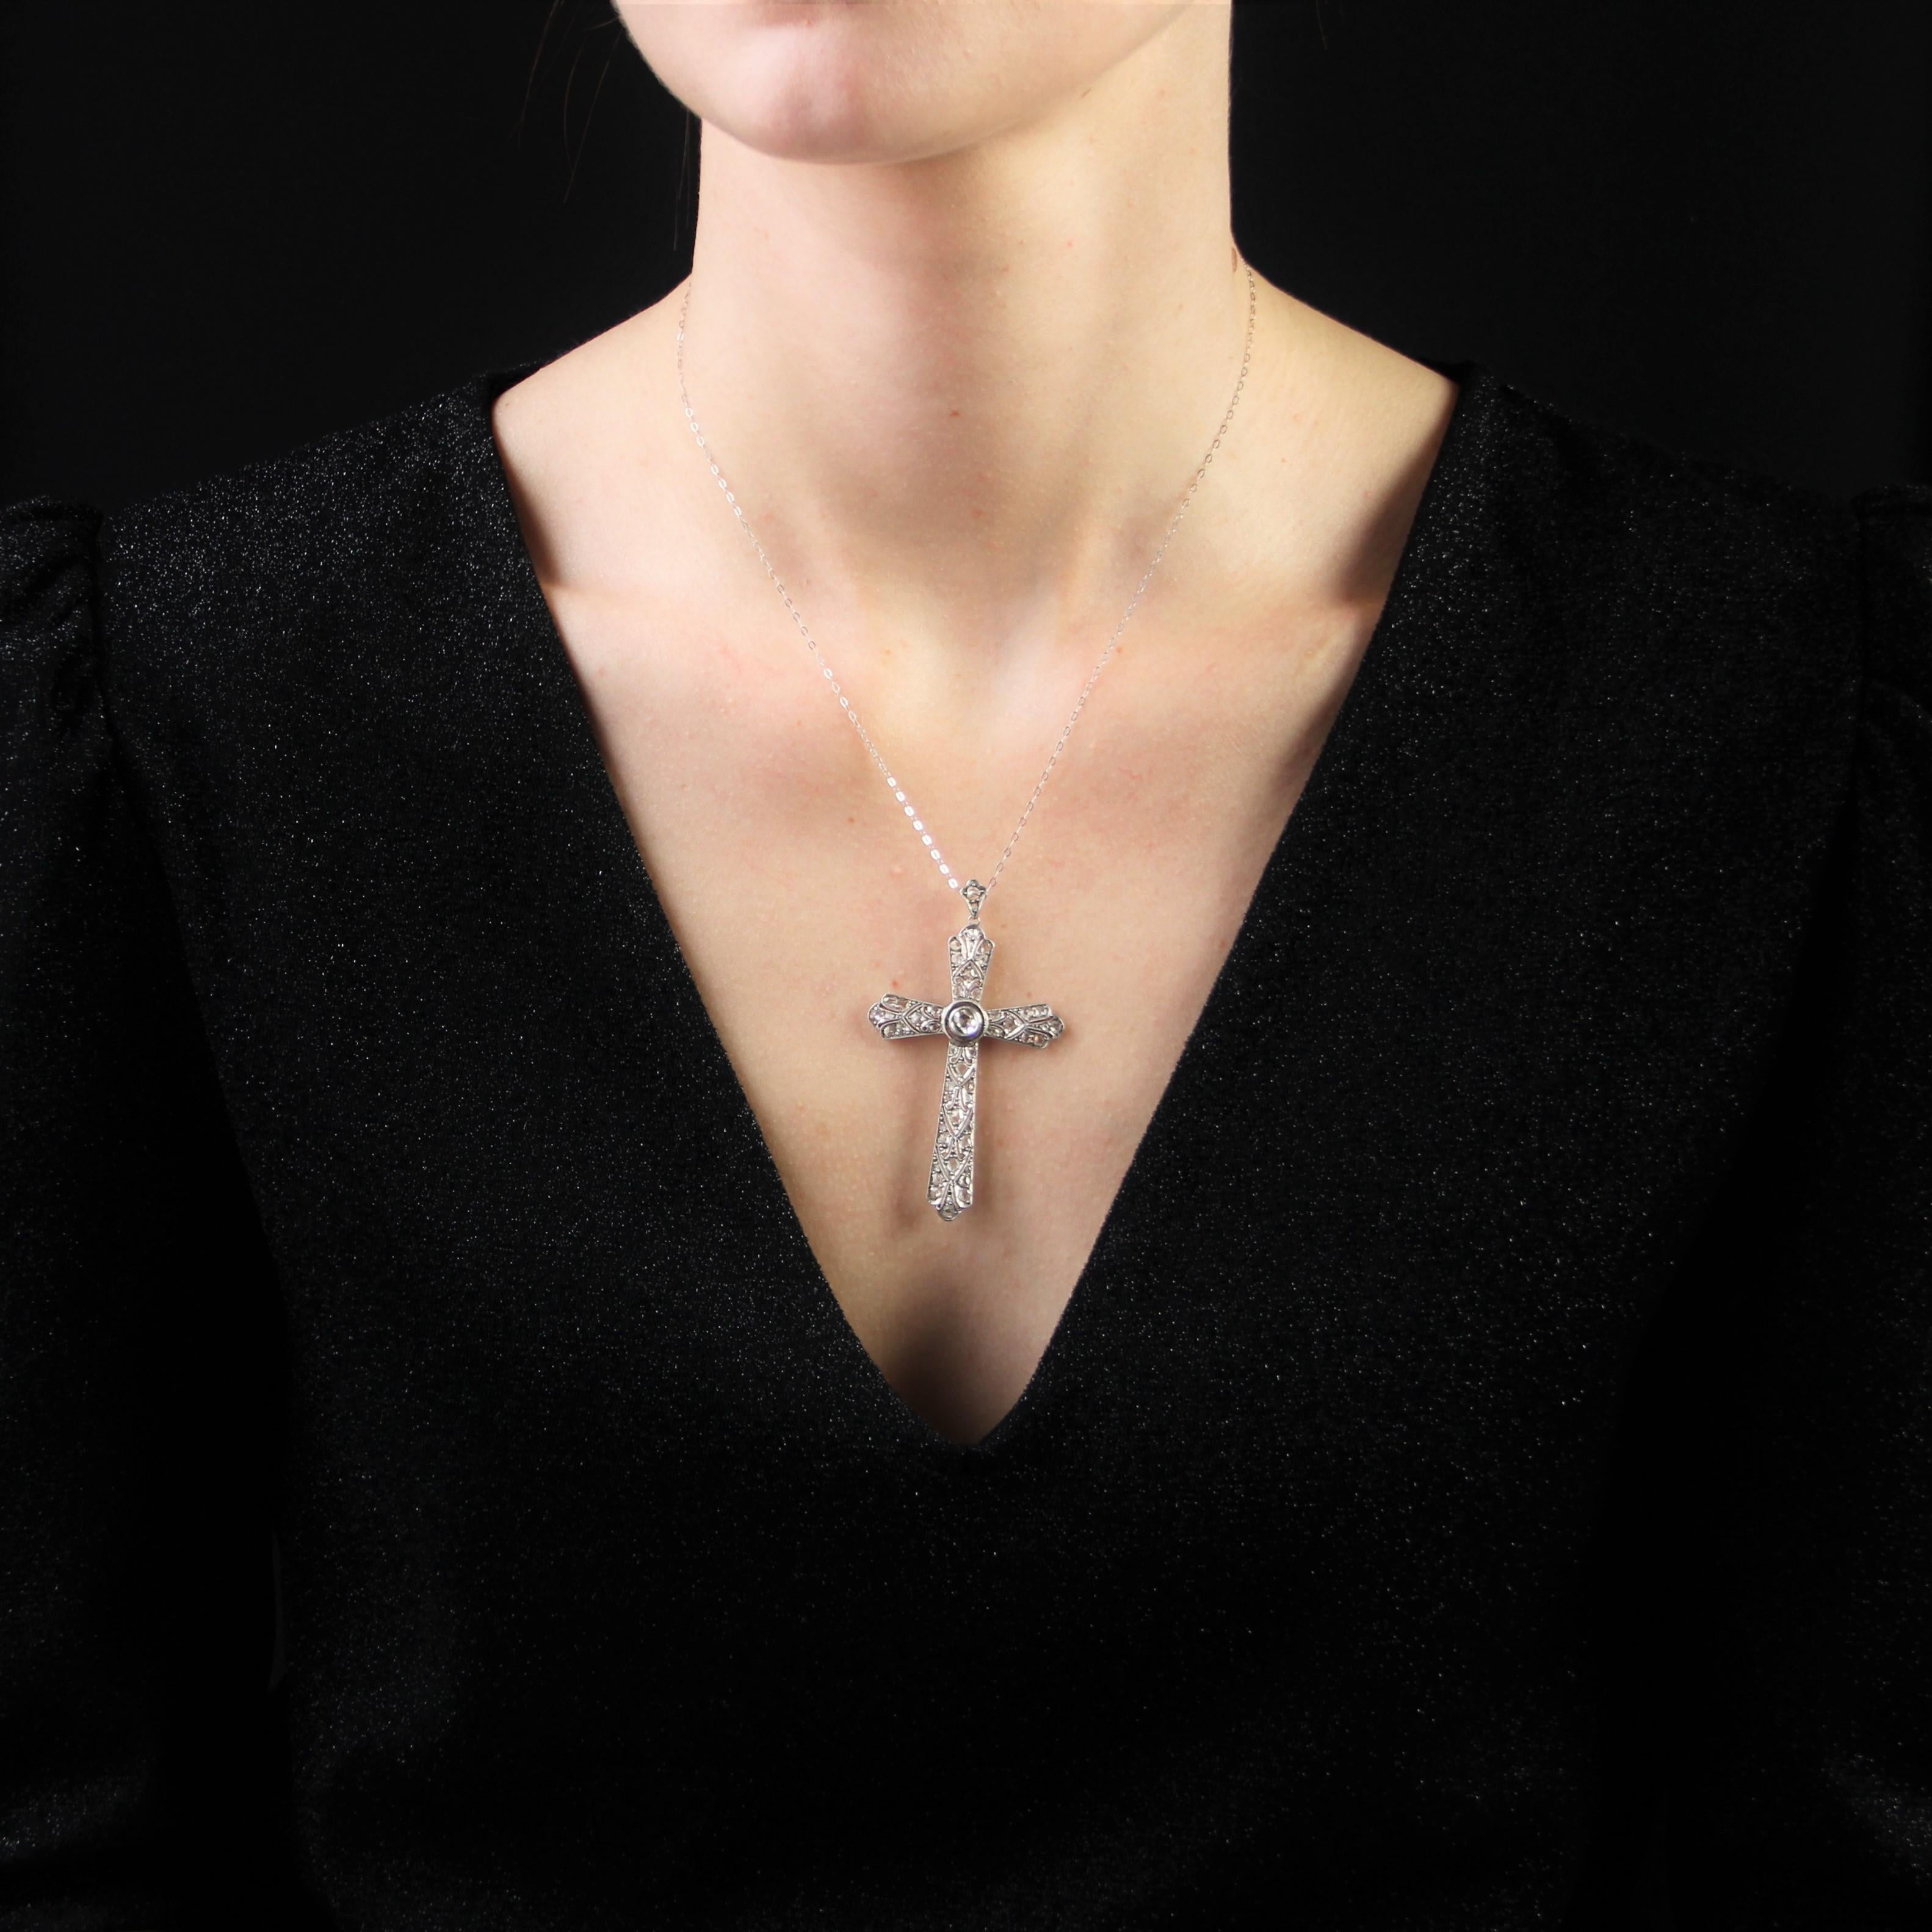 Cross in silver, swan hallmark.
Beautiful antique cross it is openworked and decorated on all its arms of rose-cut diamonds. In the center, a round pattern is set with a rose-cut diamond of larger size. The clasp is also set with 2 rose-cut